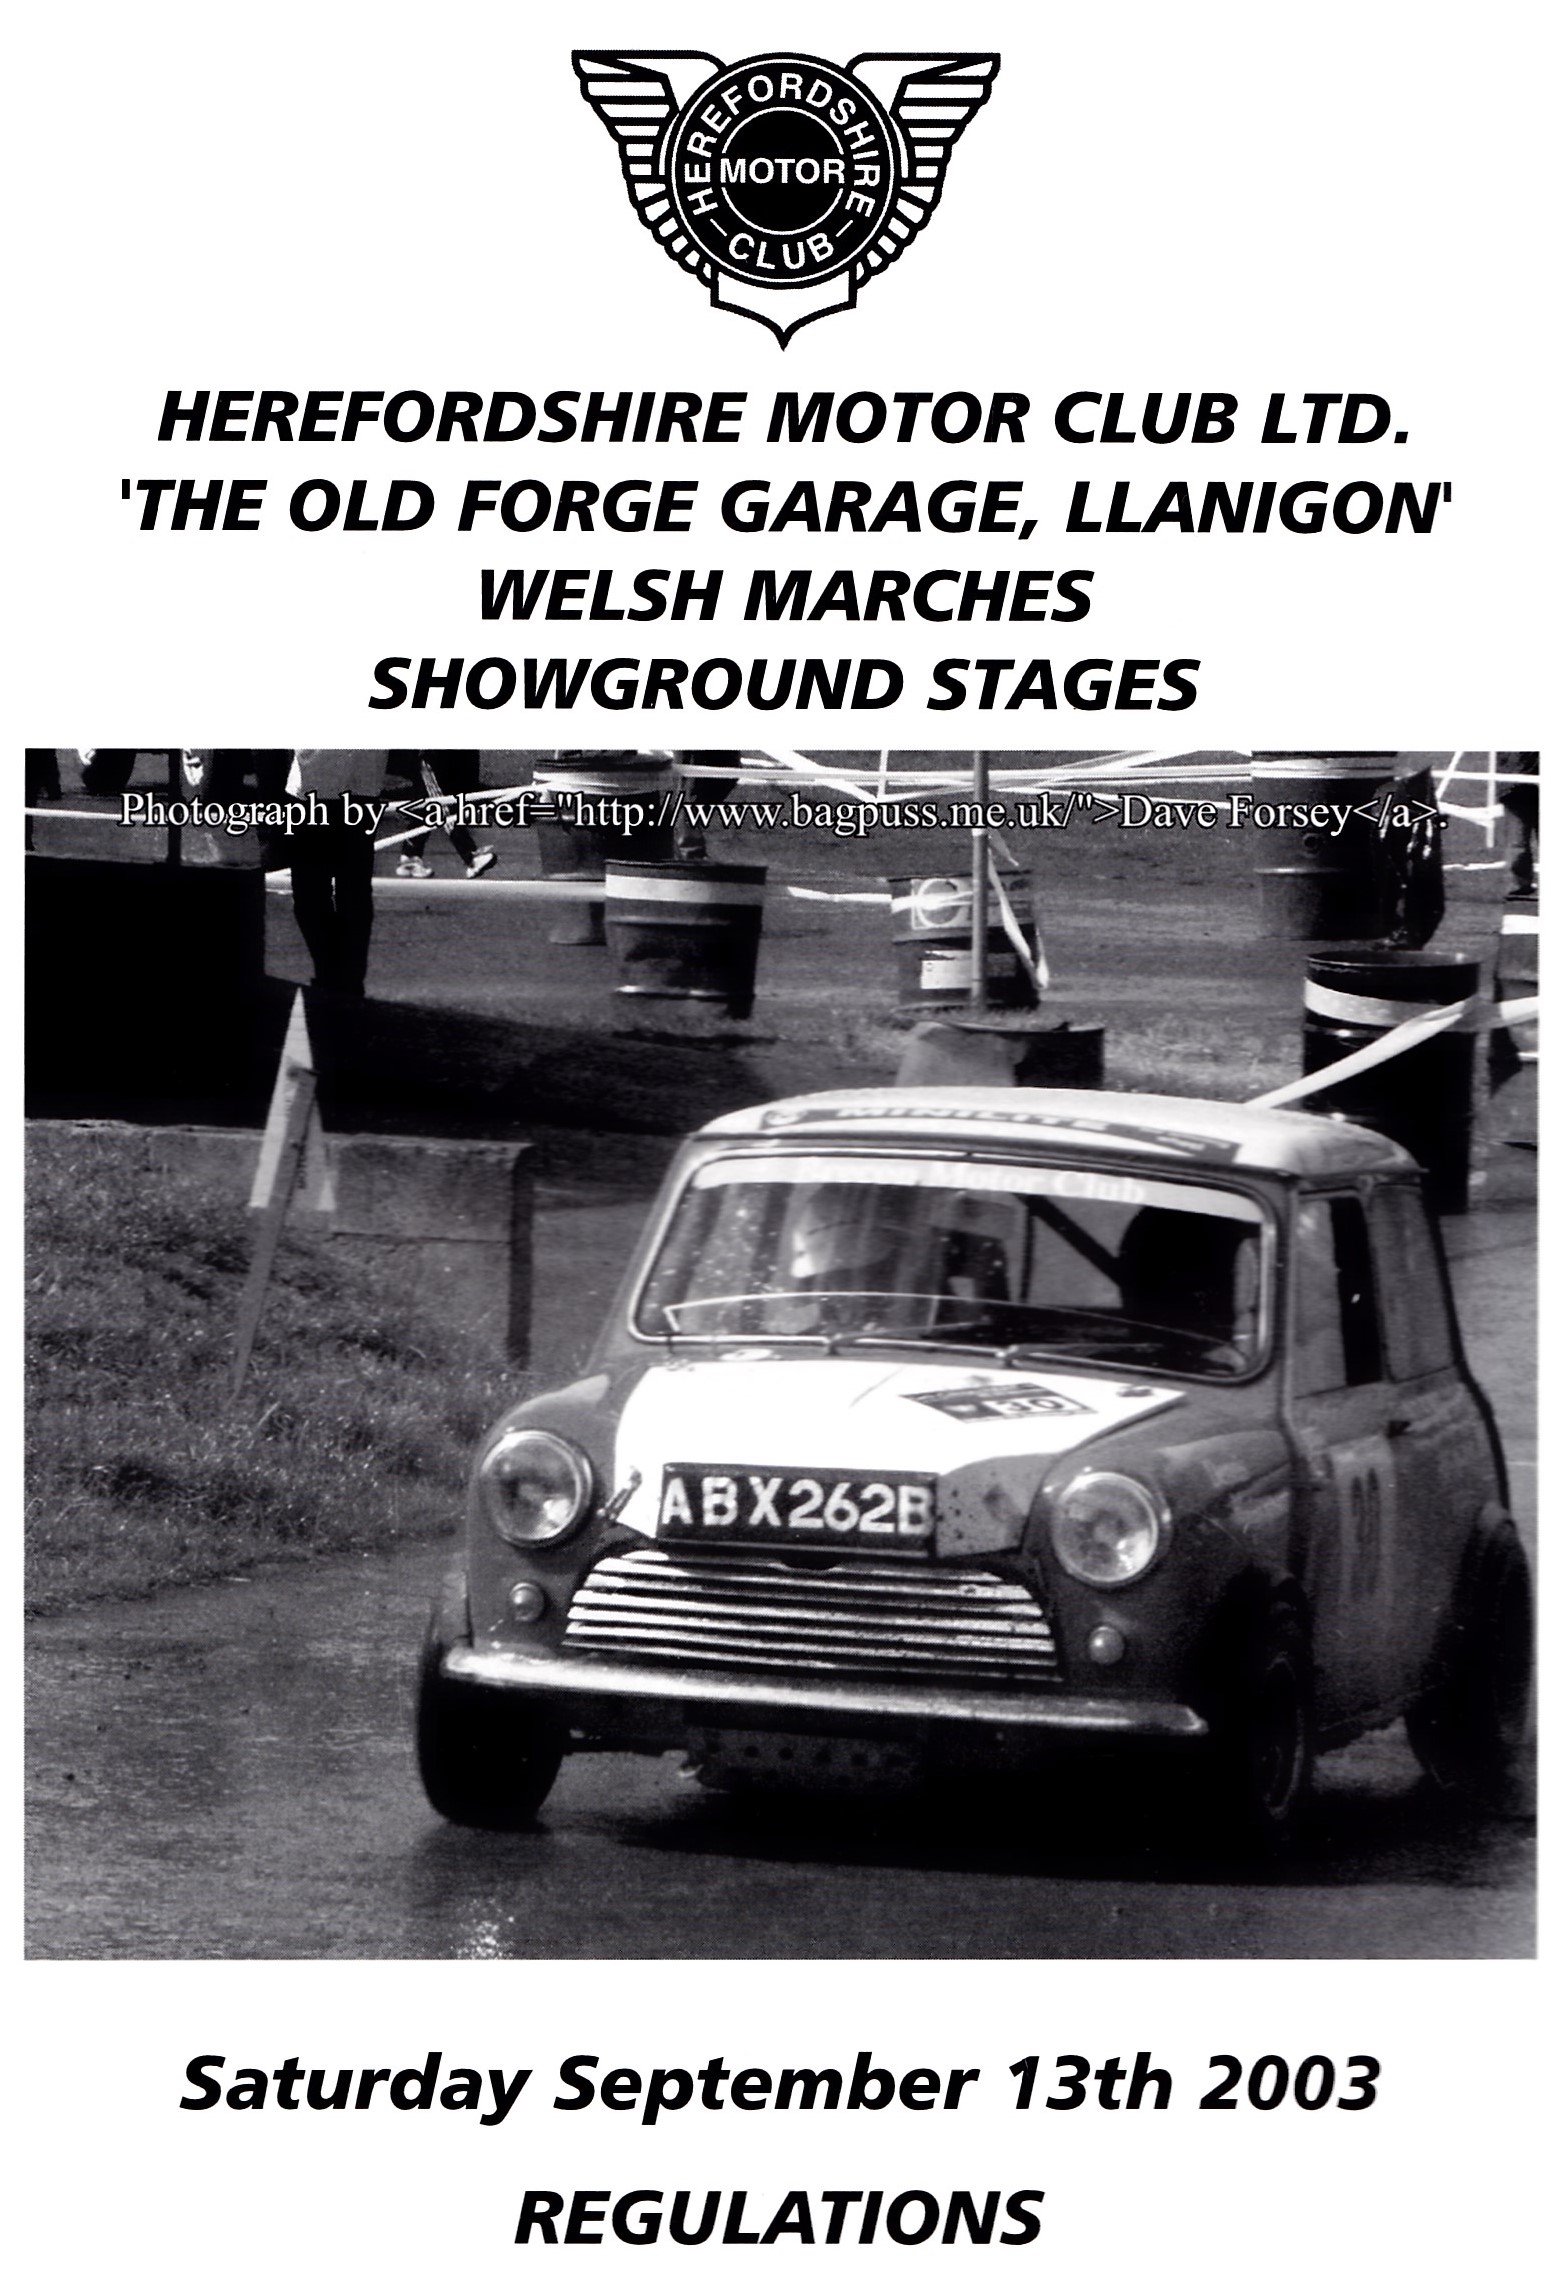 Welsh Marches Showground Stages 2003